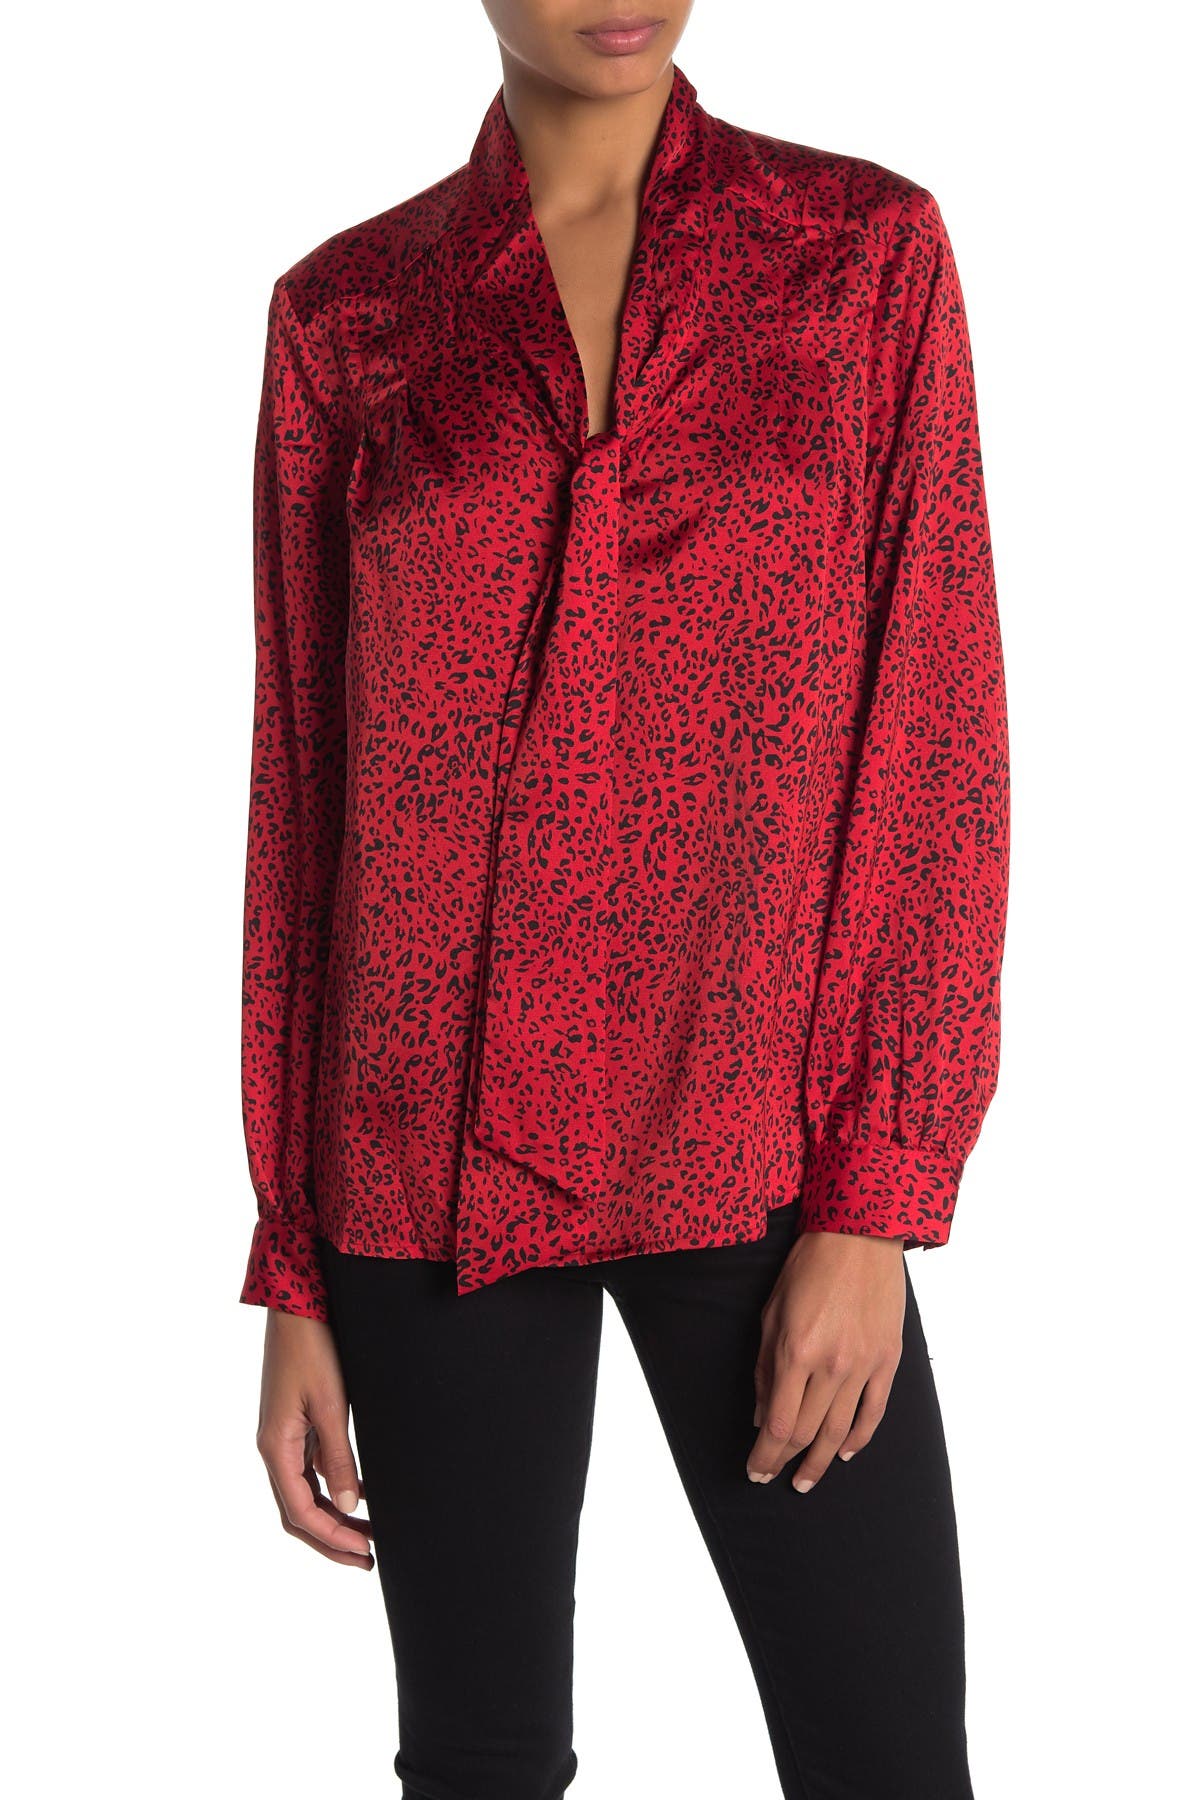 leopard print blouse red